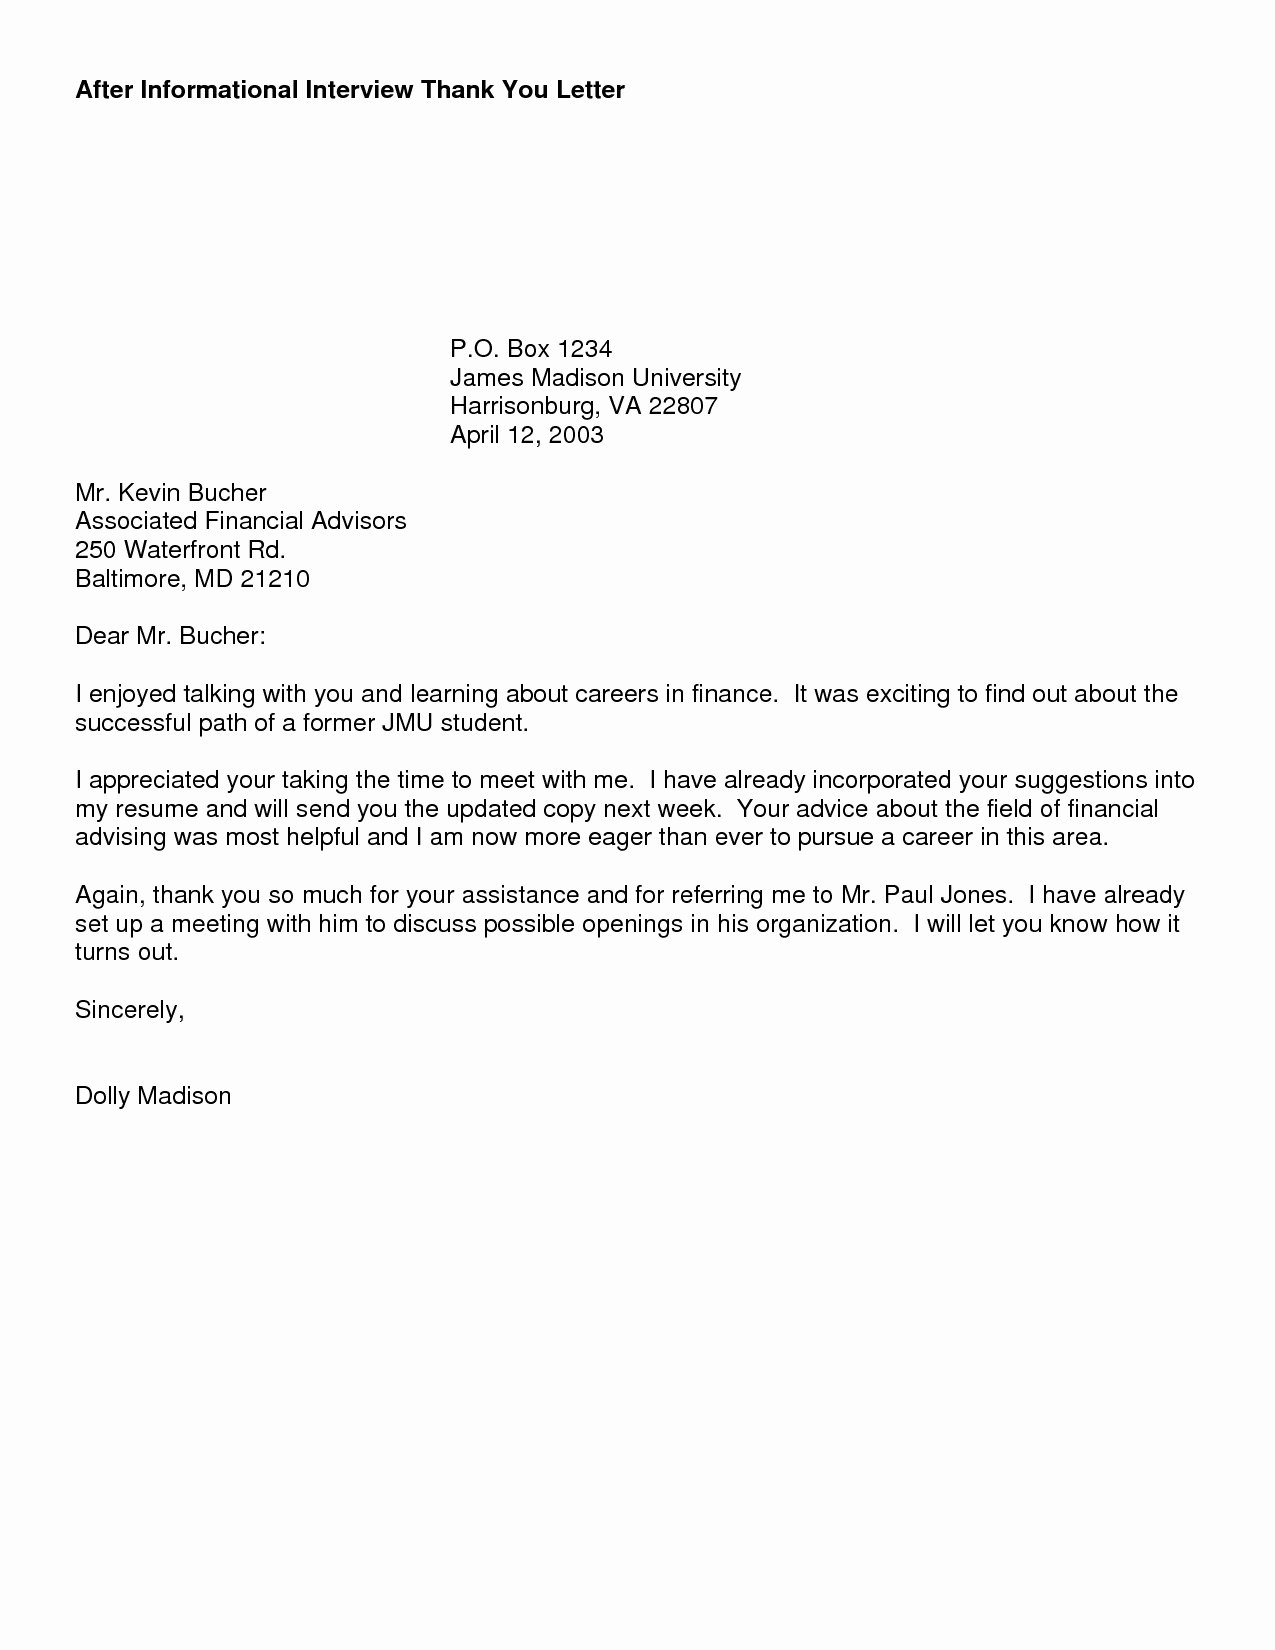 Medical School Interview Thank You Letter Beautiful Best solutions Thank You Letter after Dental School